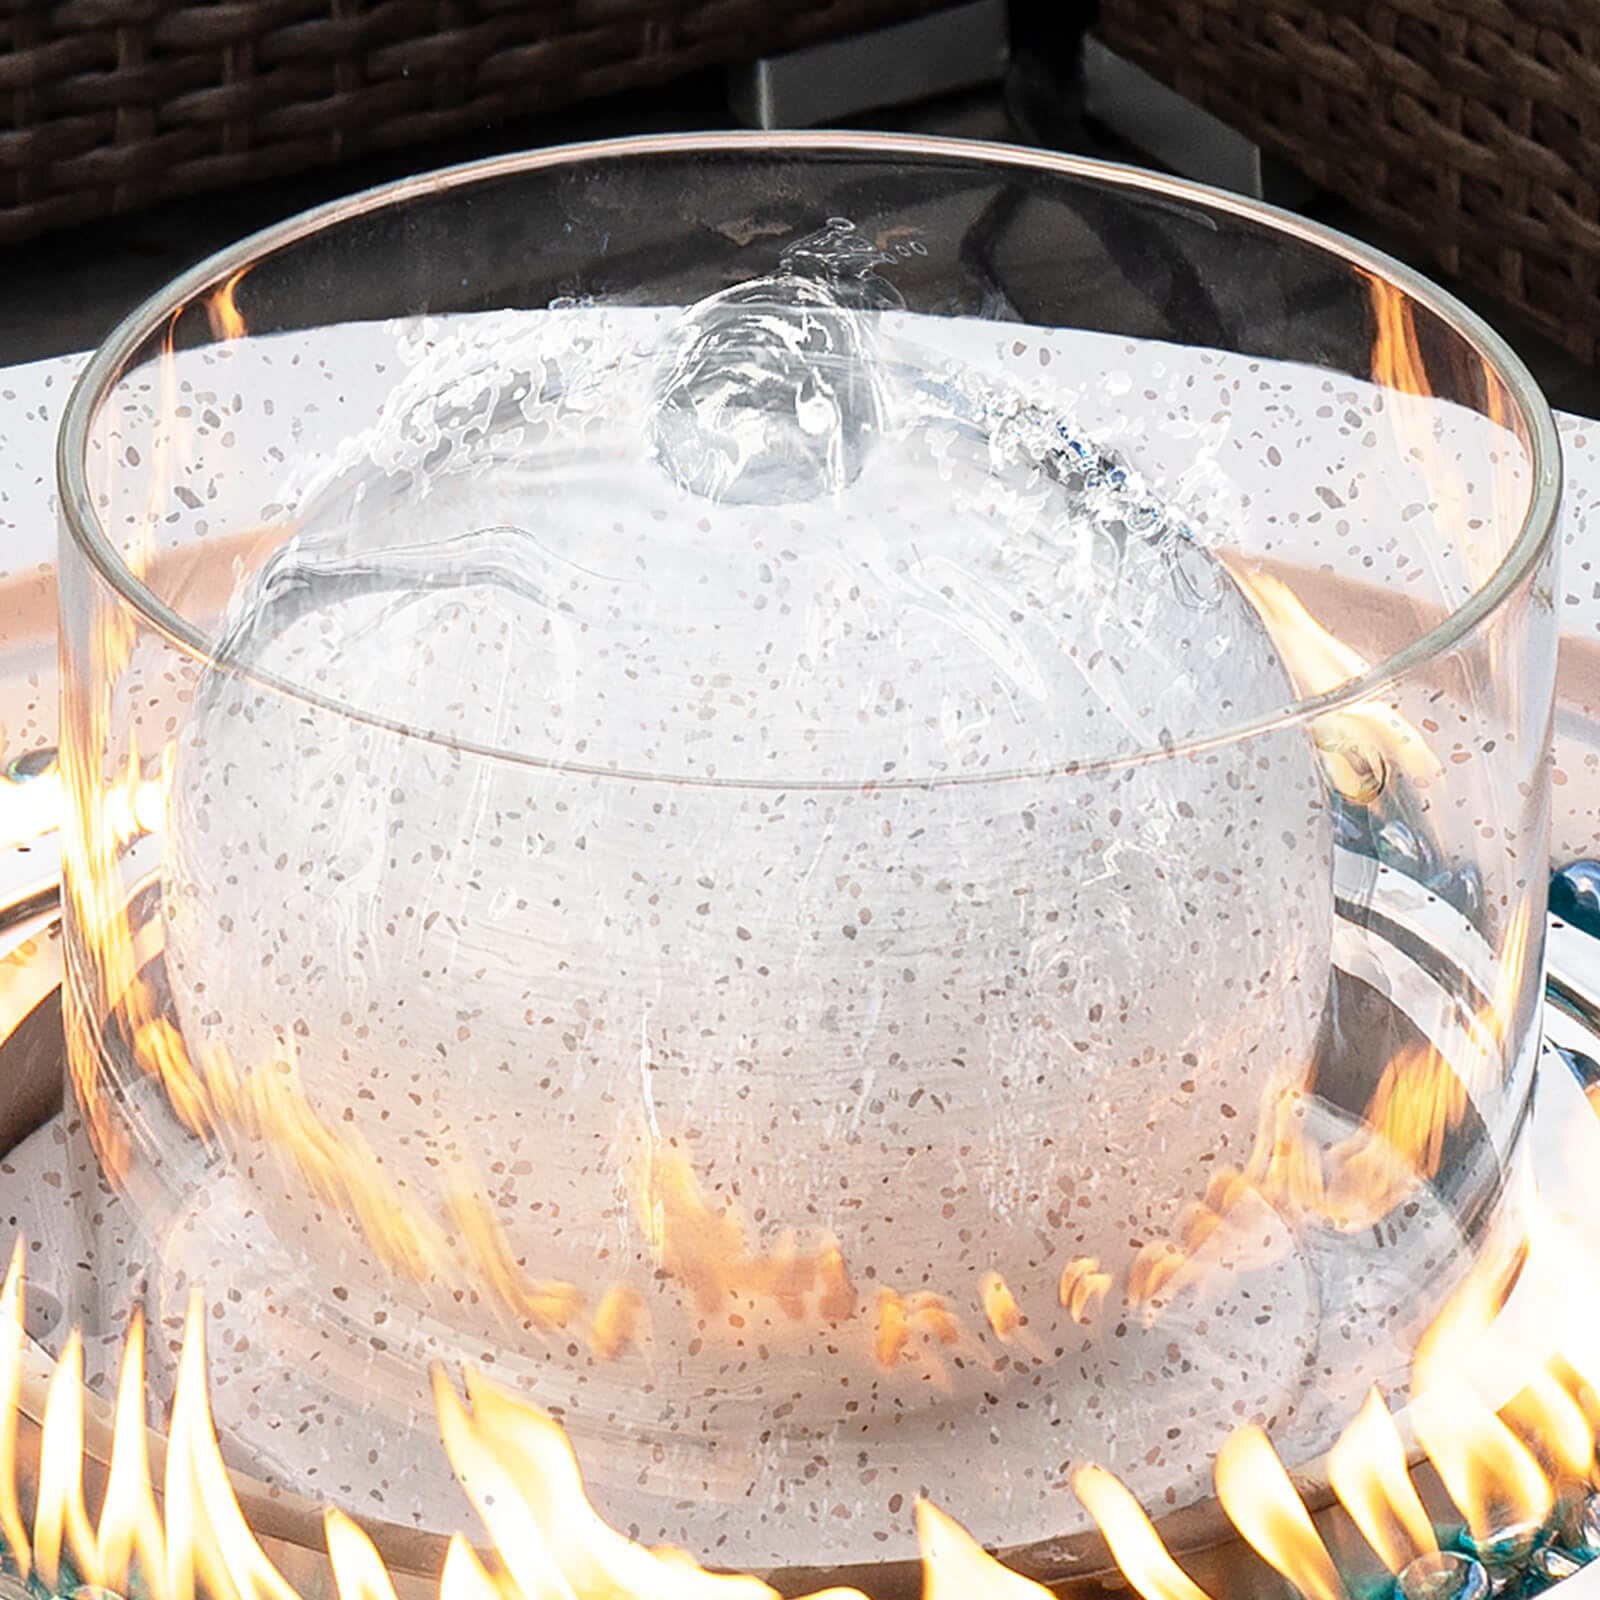 Fountain Round Propane Fire Pit Table